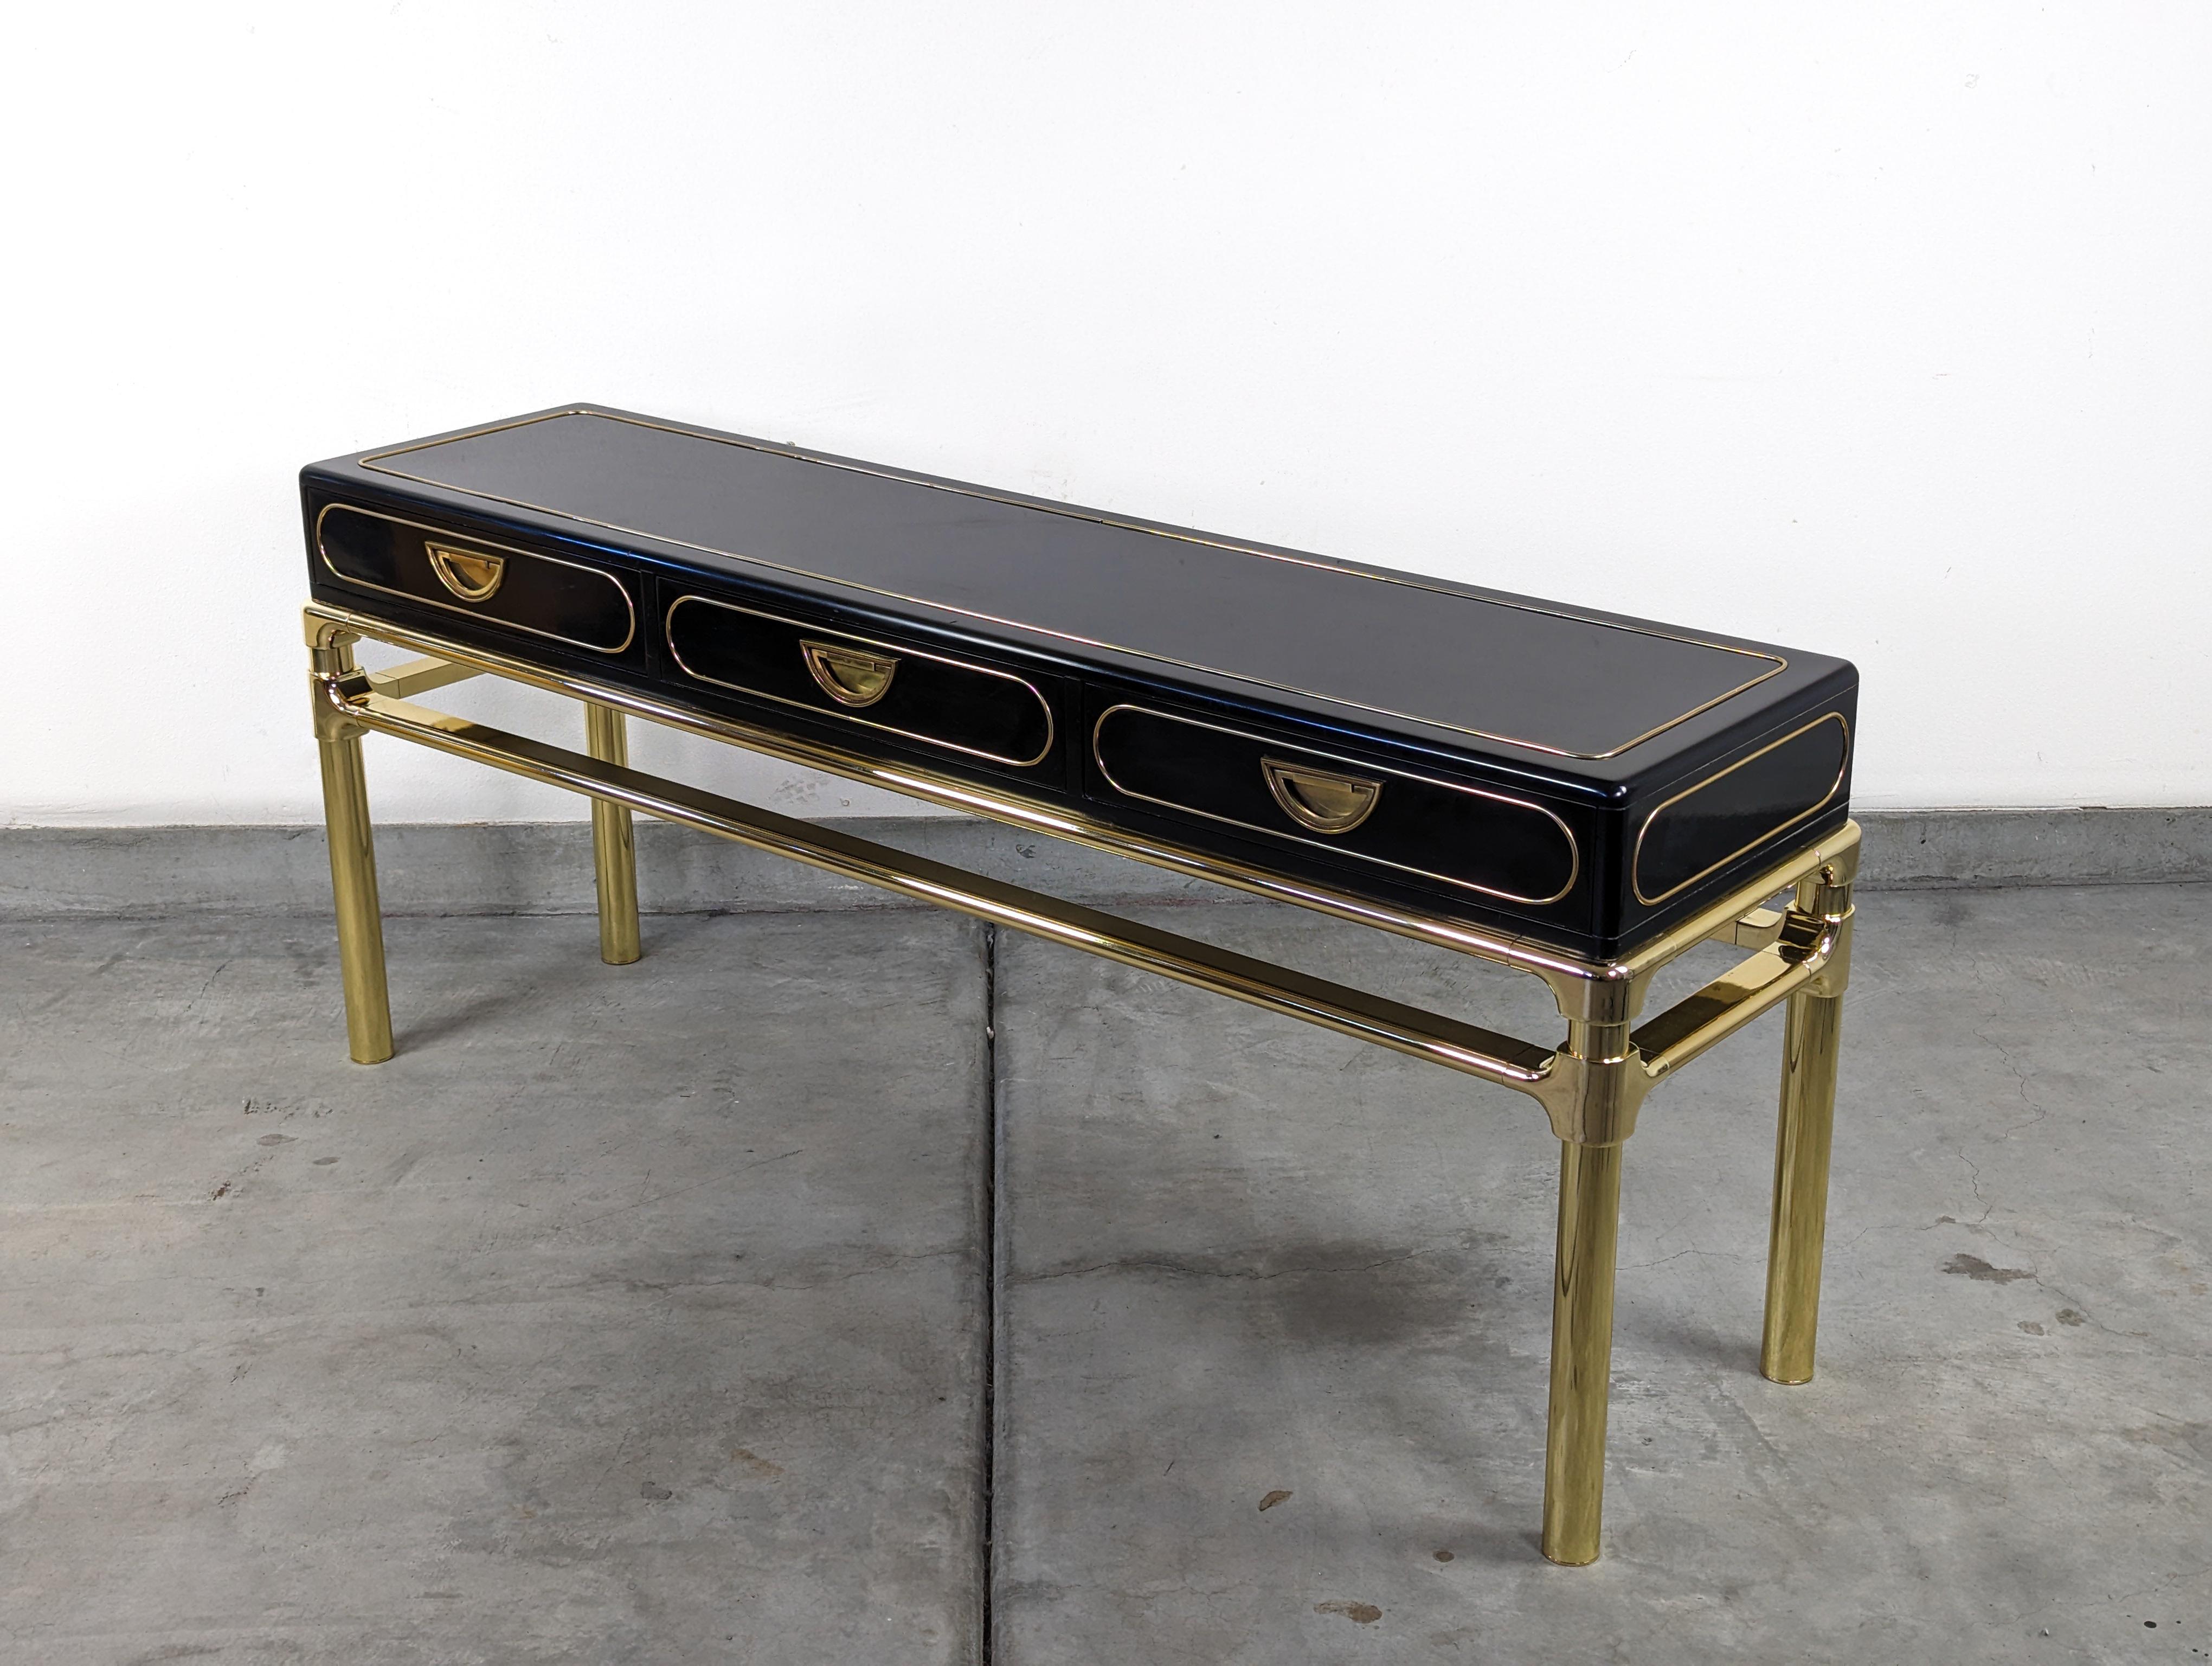 Brass and Black Lacquer Console Table With Drawers by Mastercraft, c1970s For Sale 2